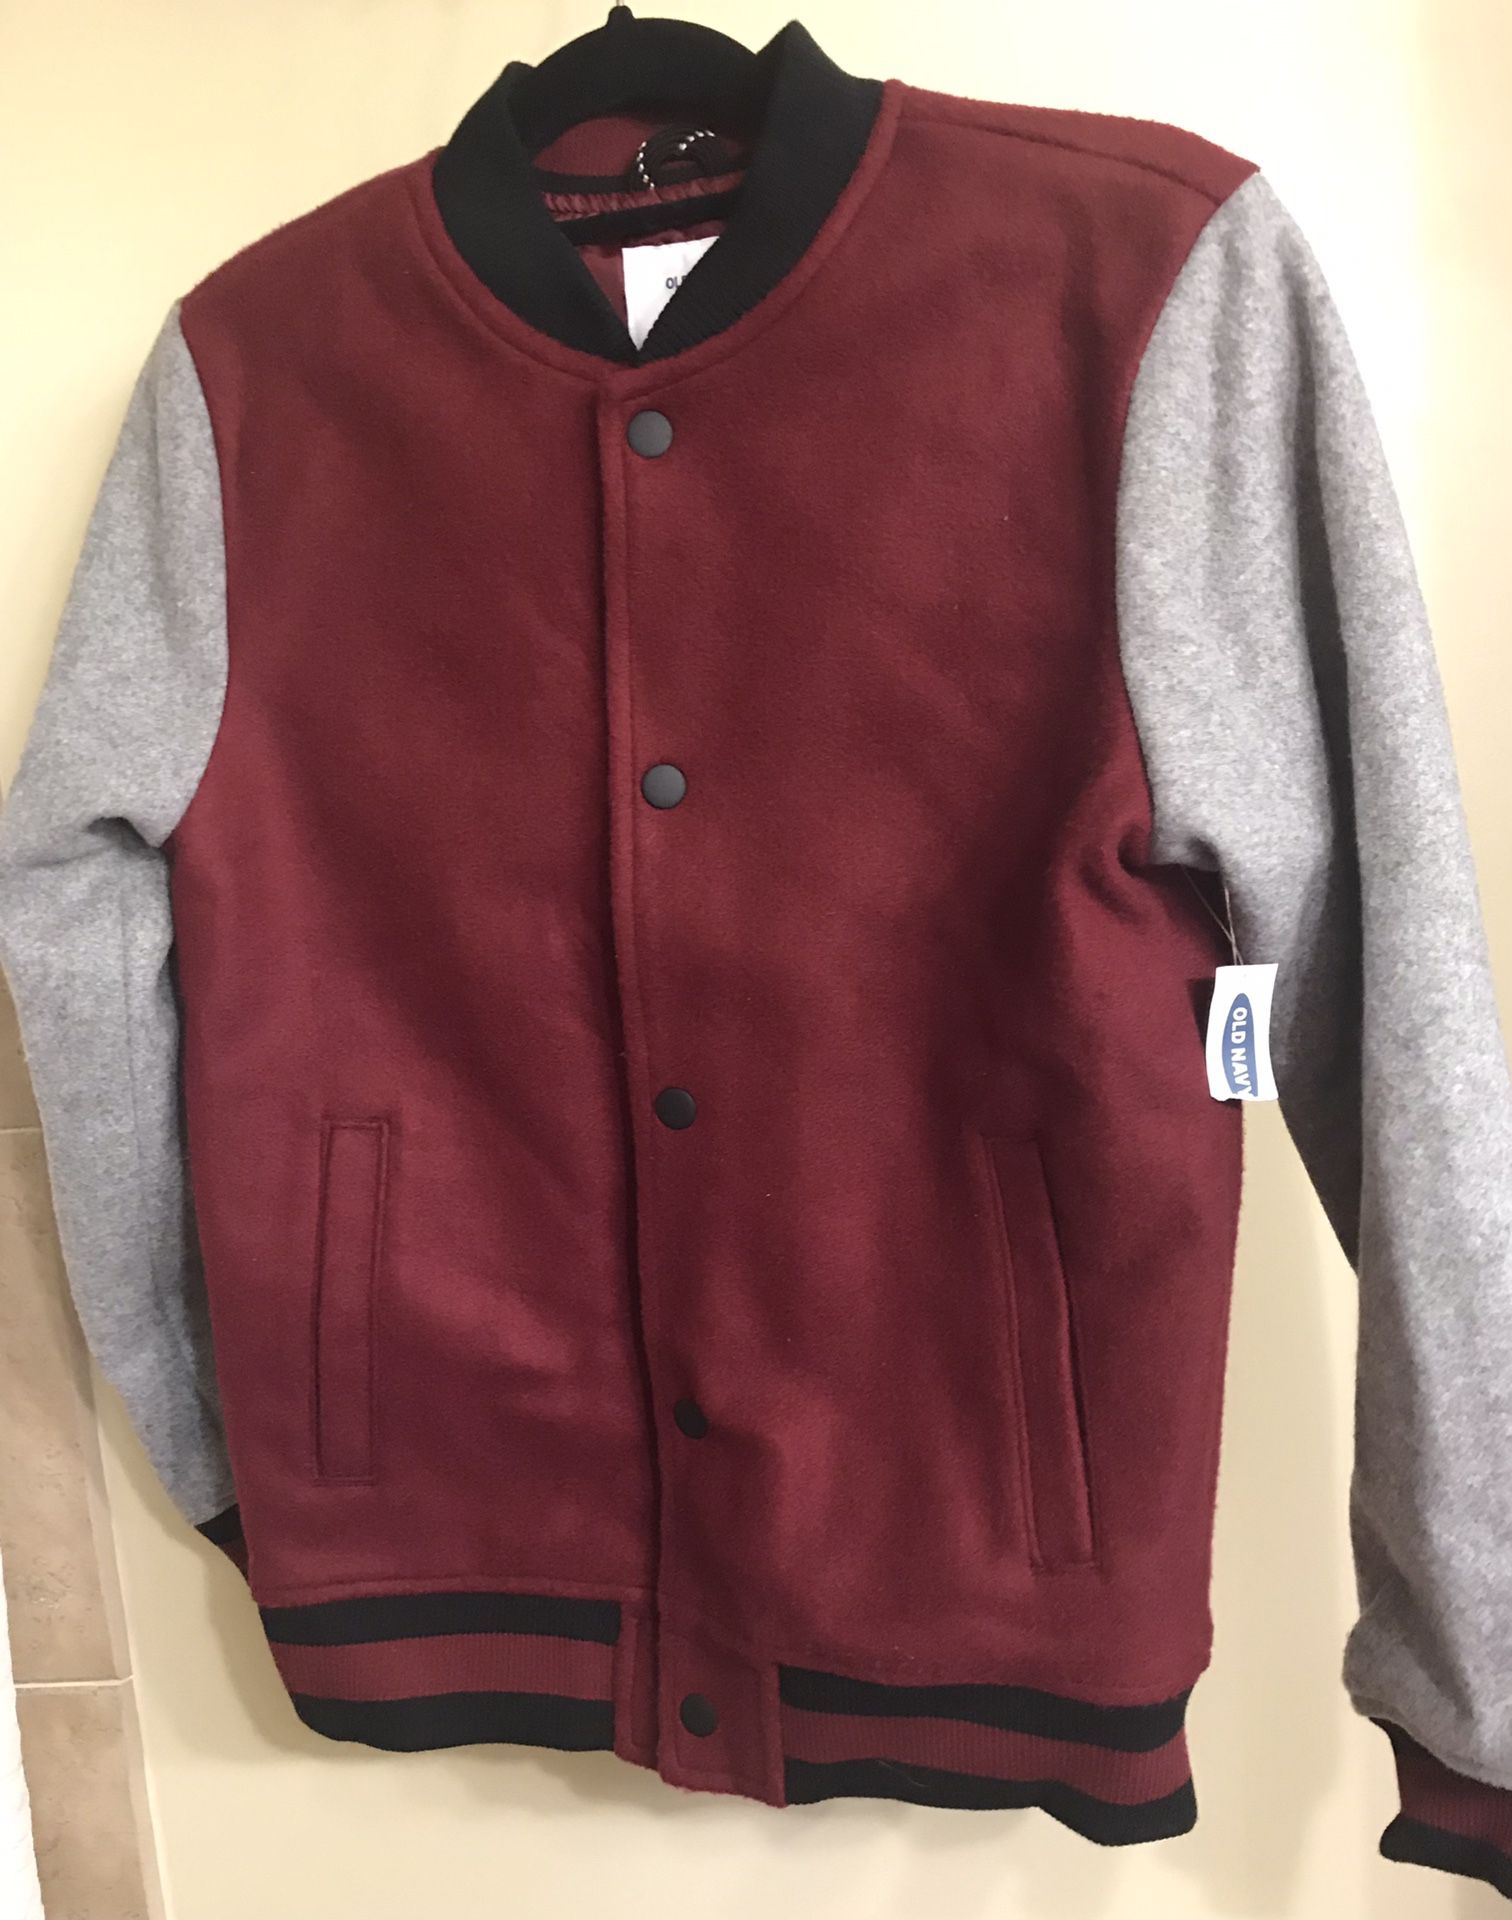 Boys jacket - New with tags